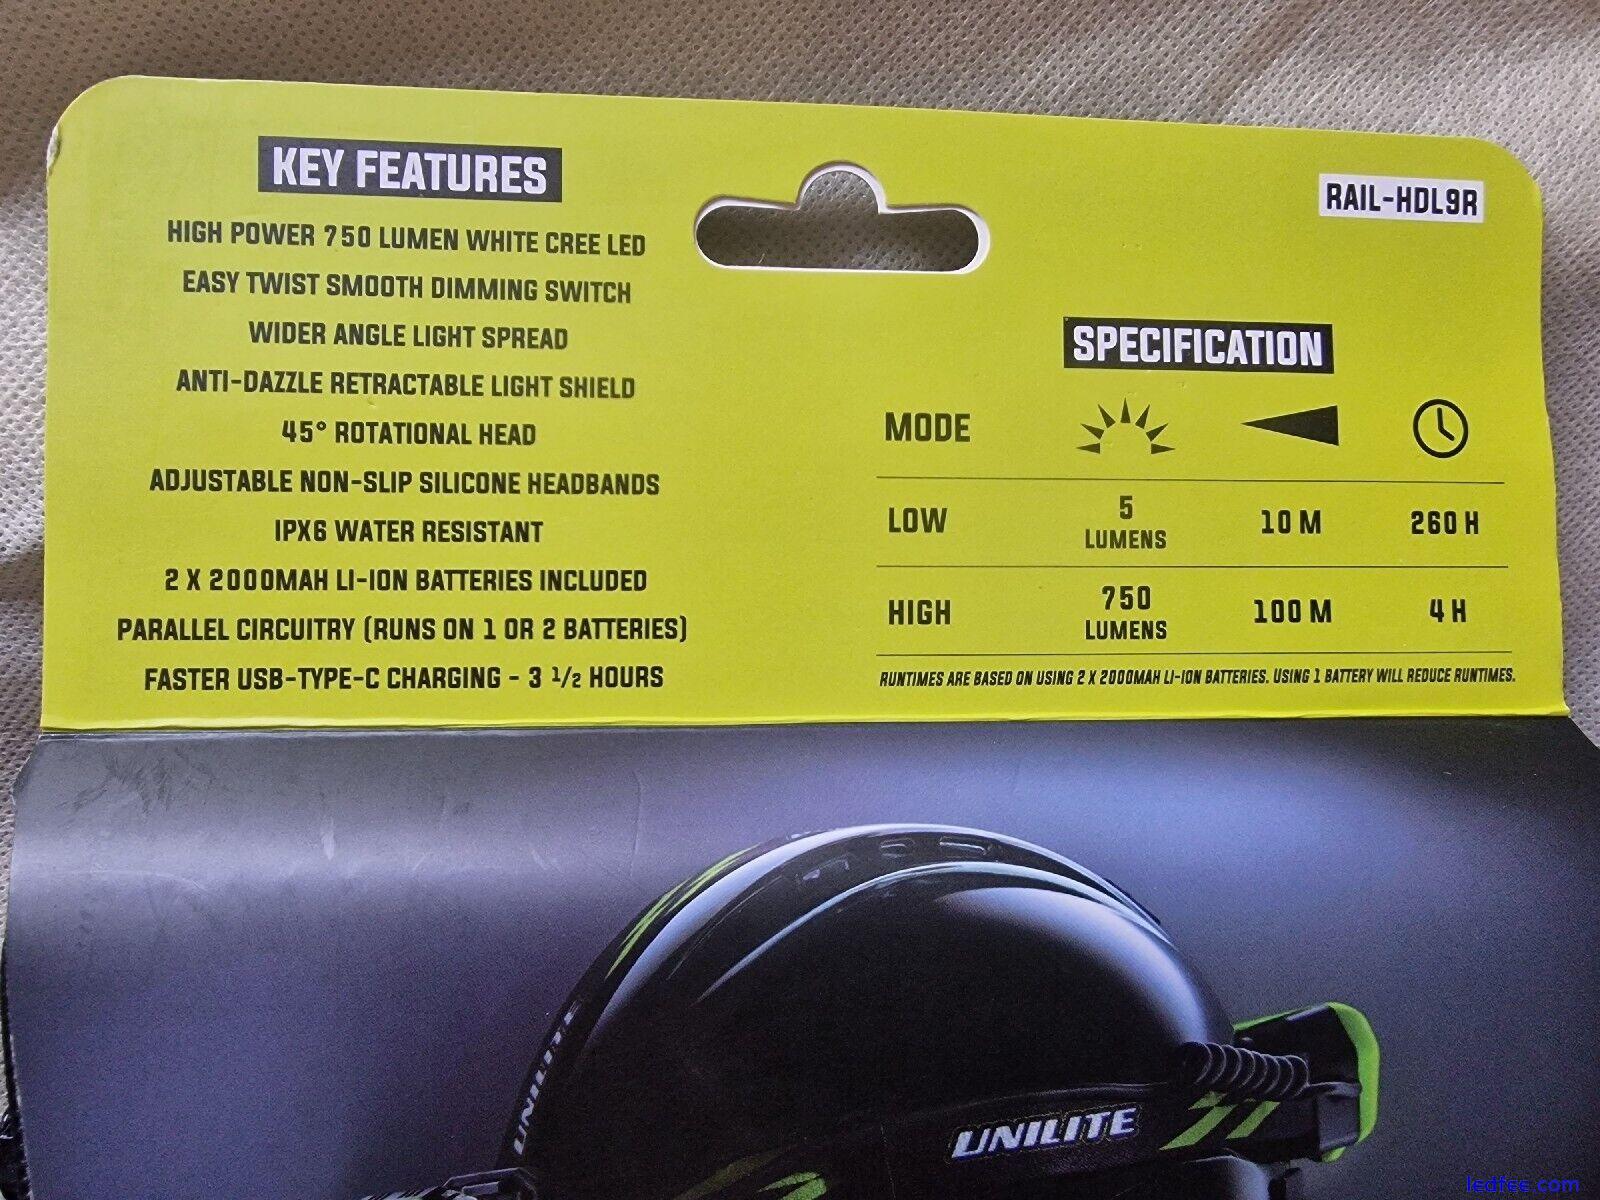 Unilite RAIL-HDL9R LED Dimmable Head Torch 4 